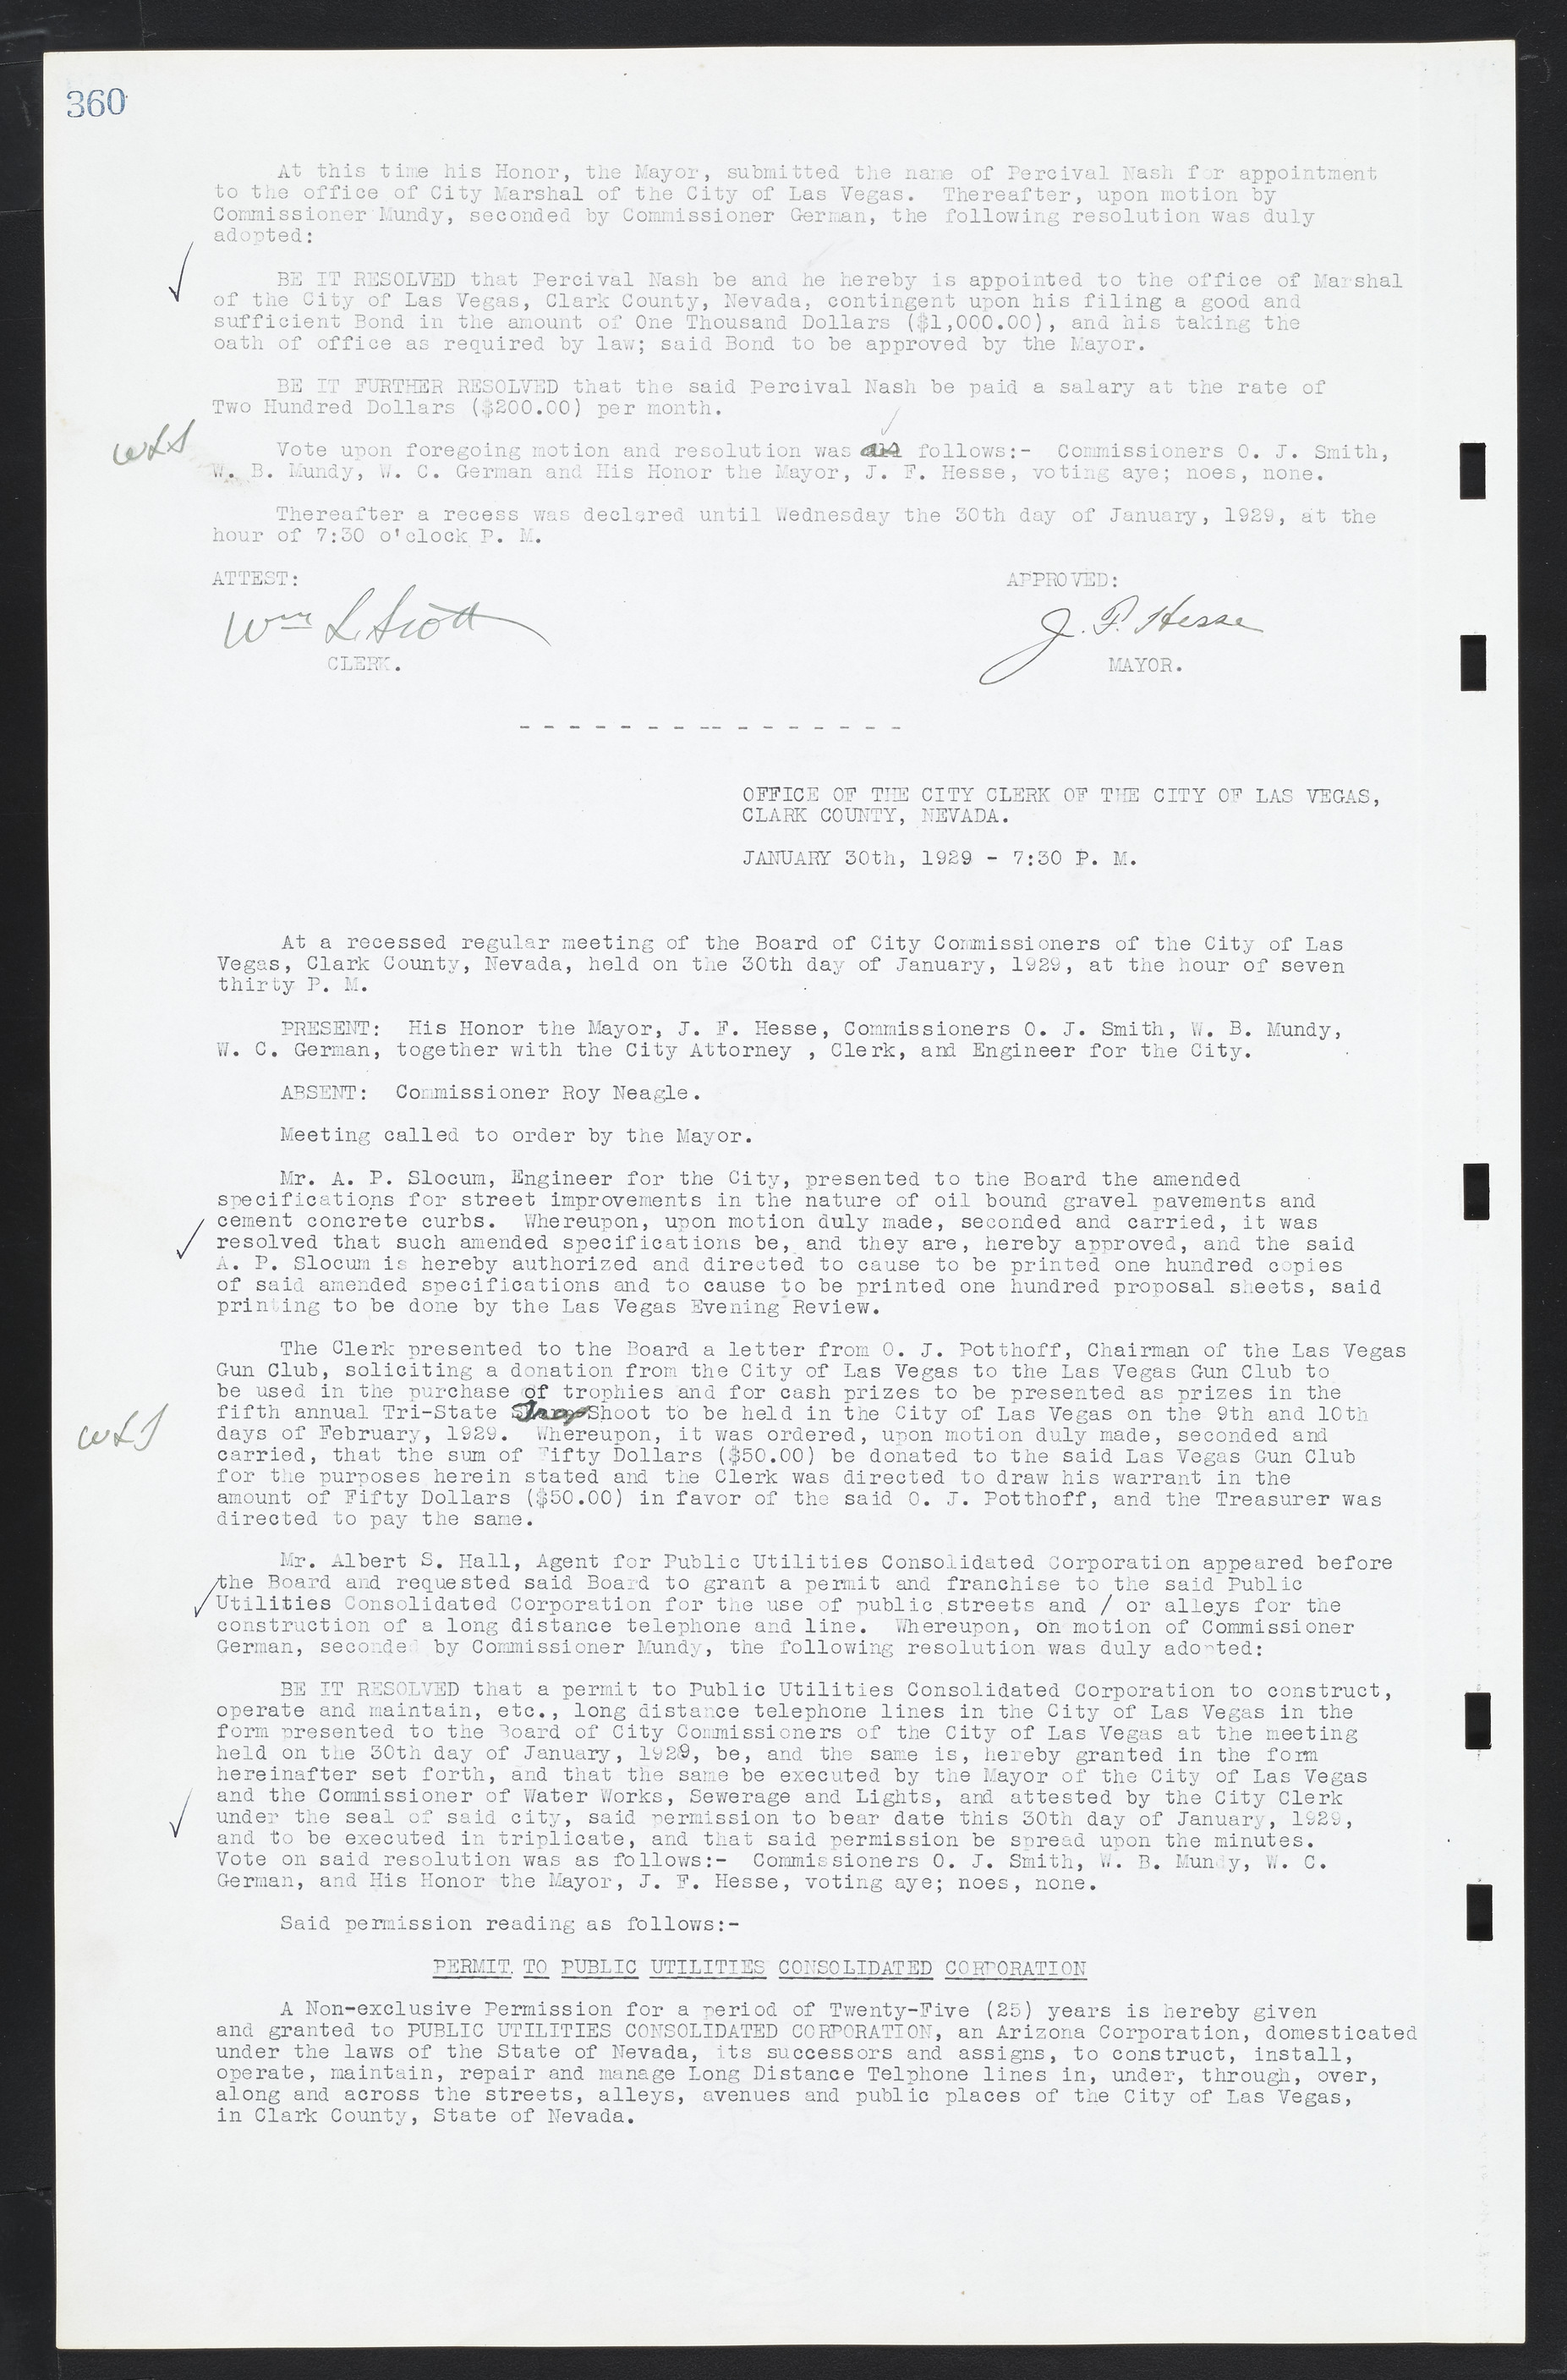 Las Vegas City Commission Minutes, March 1, 1922 to May 10, 1929, lvc000002-369